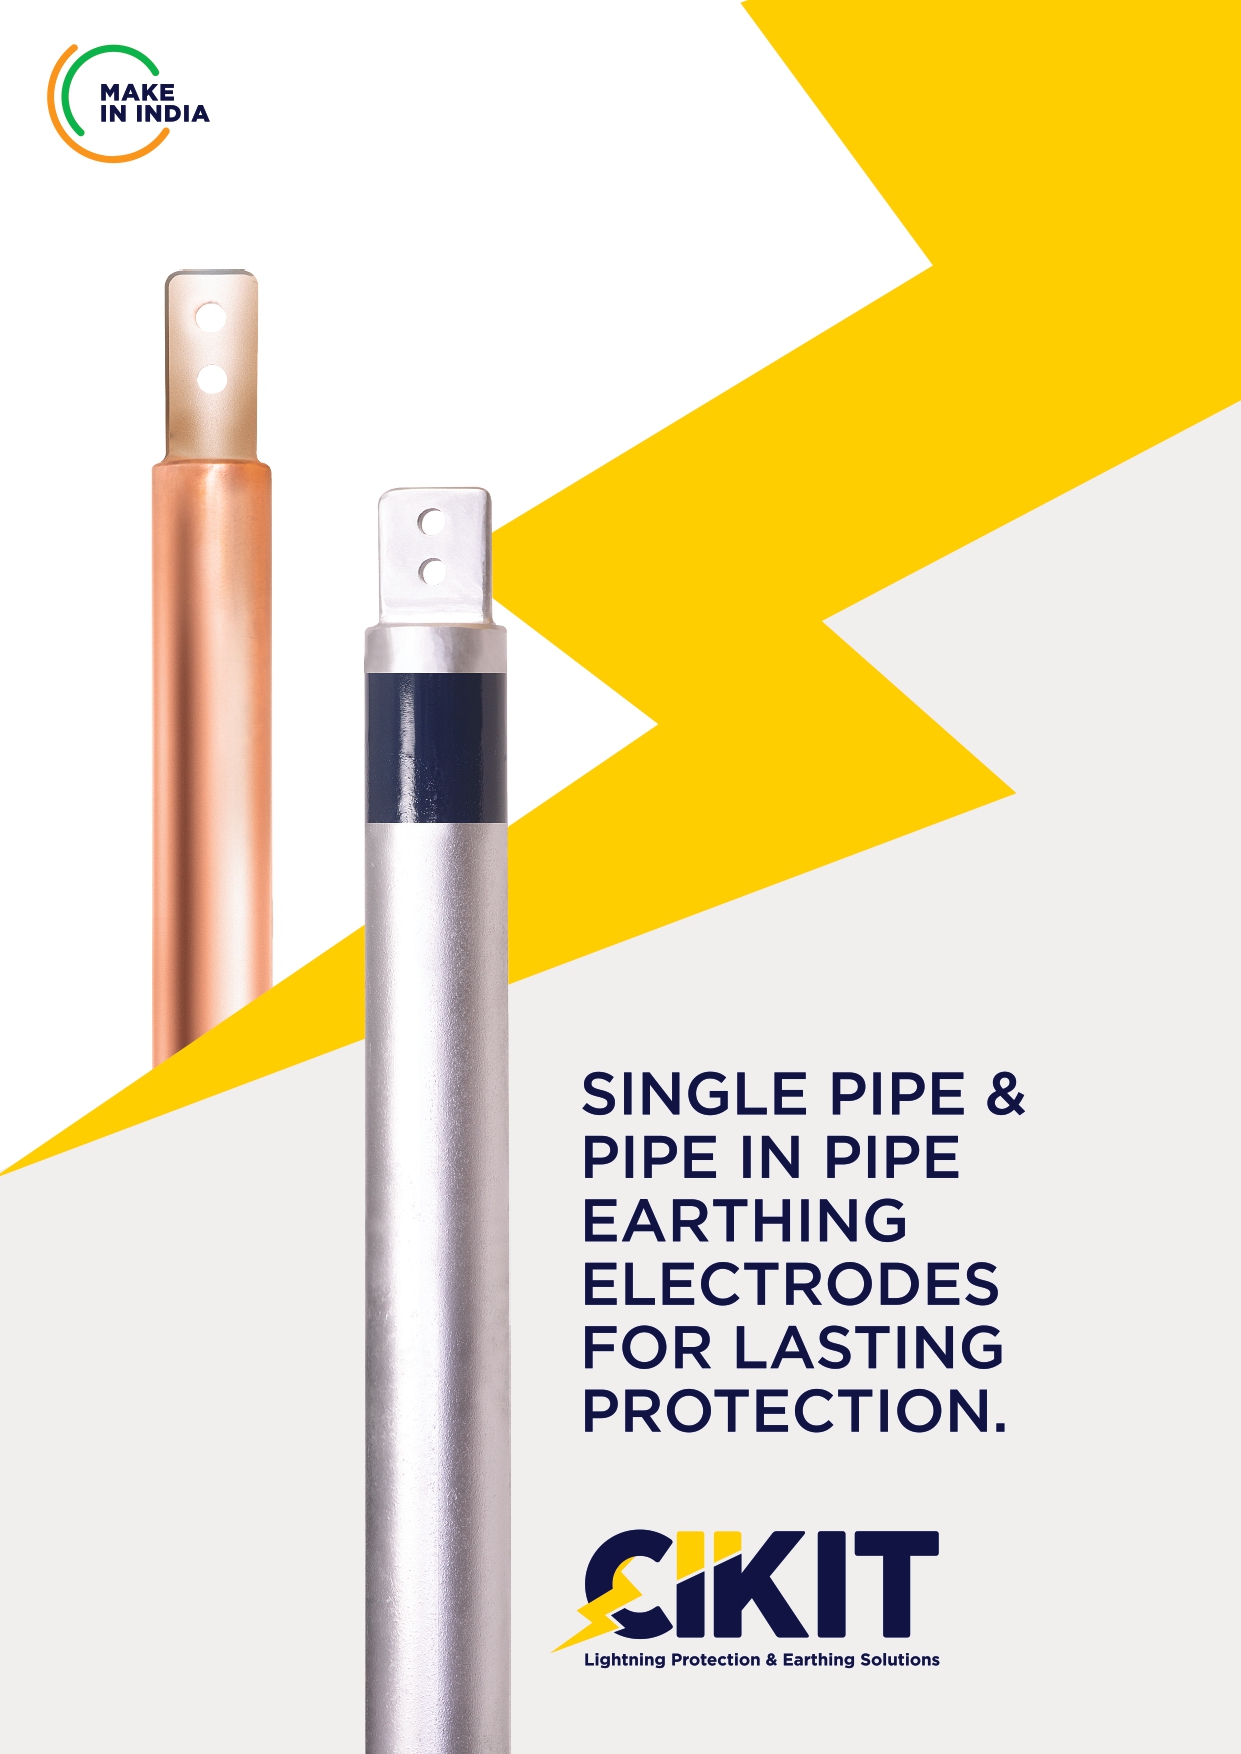 The cover image of the 'Single Pipe & PIP Earthing Electrode' product factsheet.